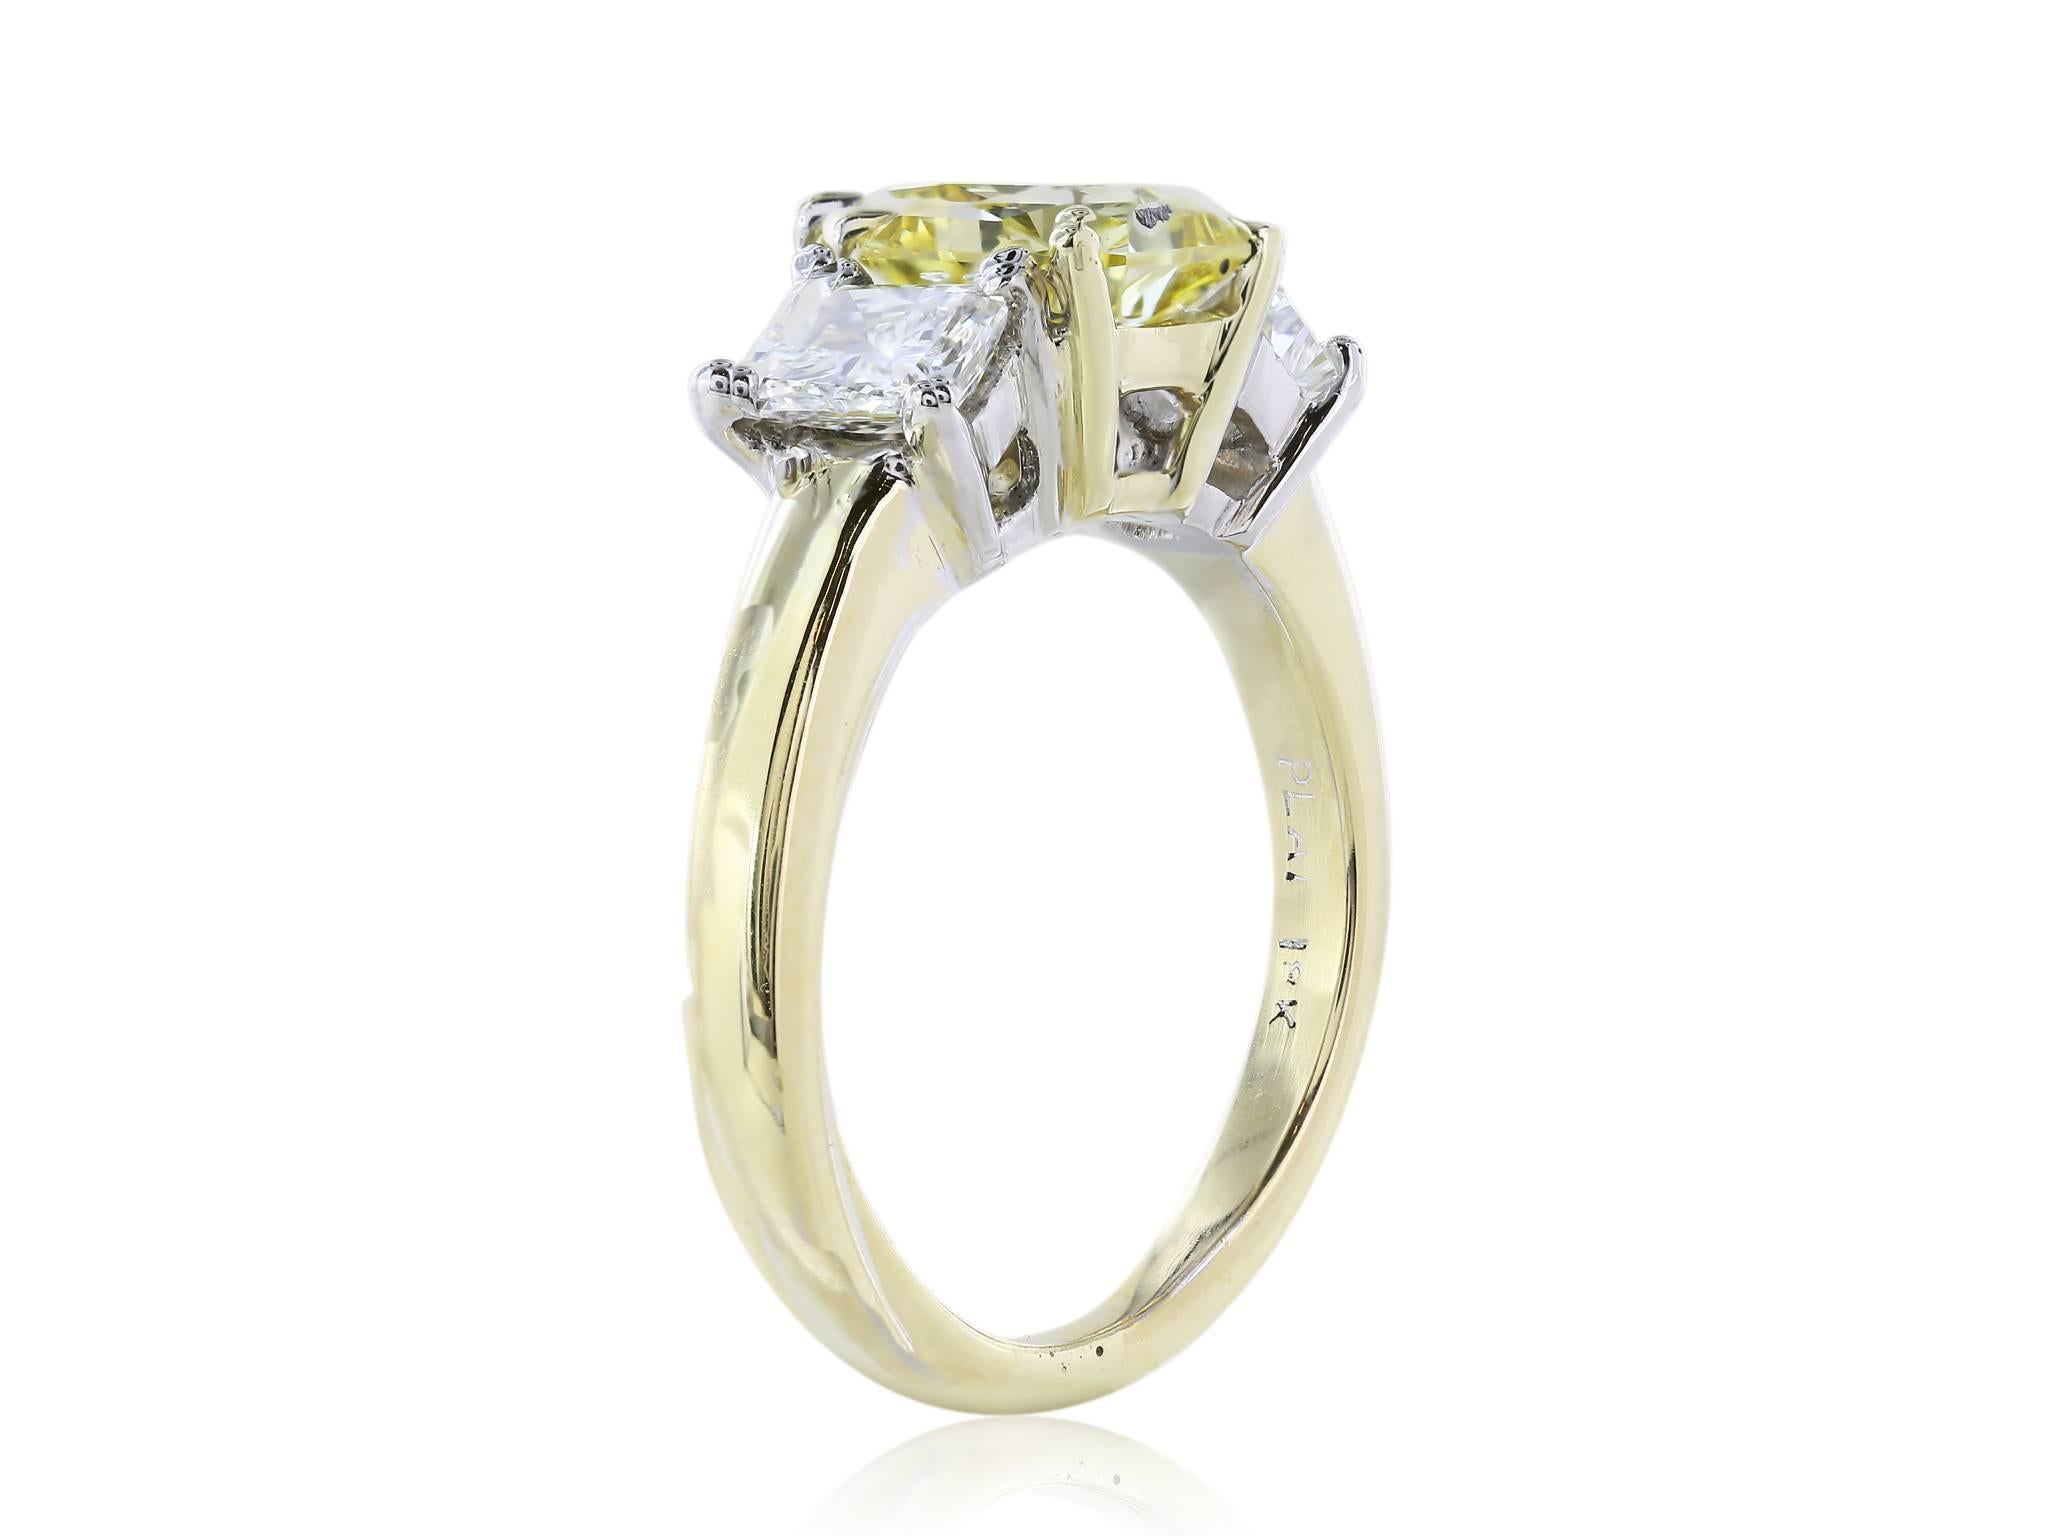 Three stone engagement ring of 1 Fancy Yellow radiant cut diamond weighing 1.66 carats, measuring 7.19 x 7.11 x 3.95 millimeters, with a clarity of VS1, flanked by two radiant cut diamonds weighing .84 carats with a color and clarity of G VS1-VS2